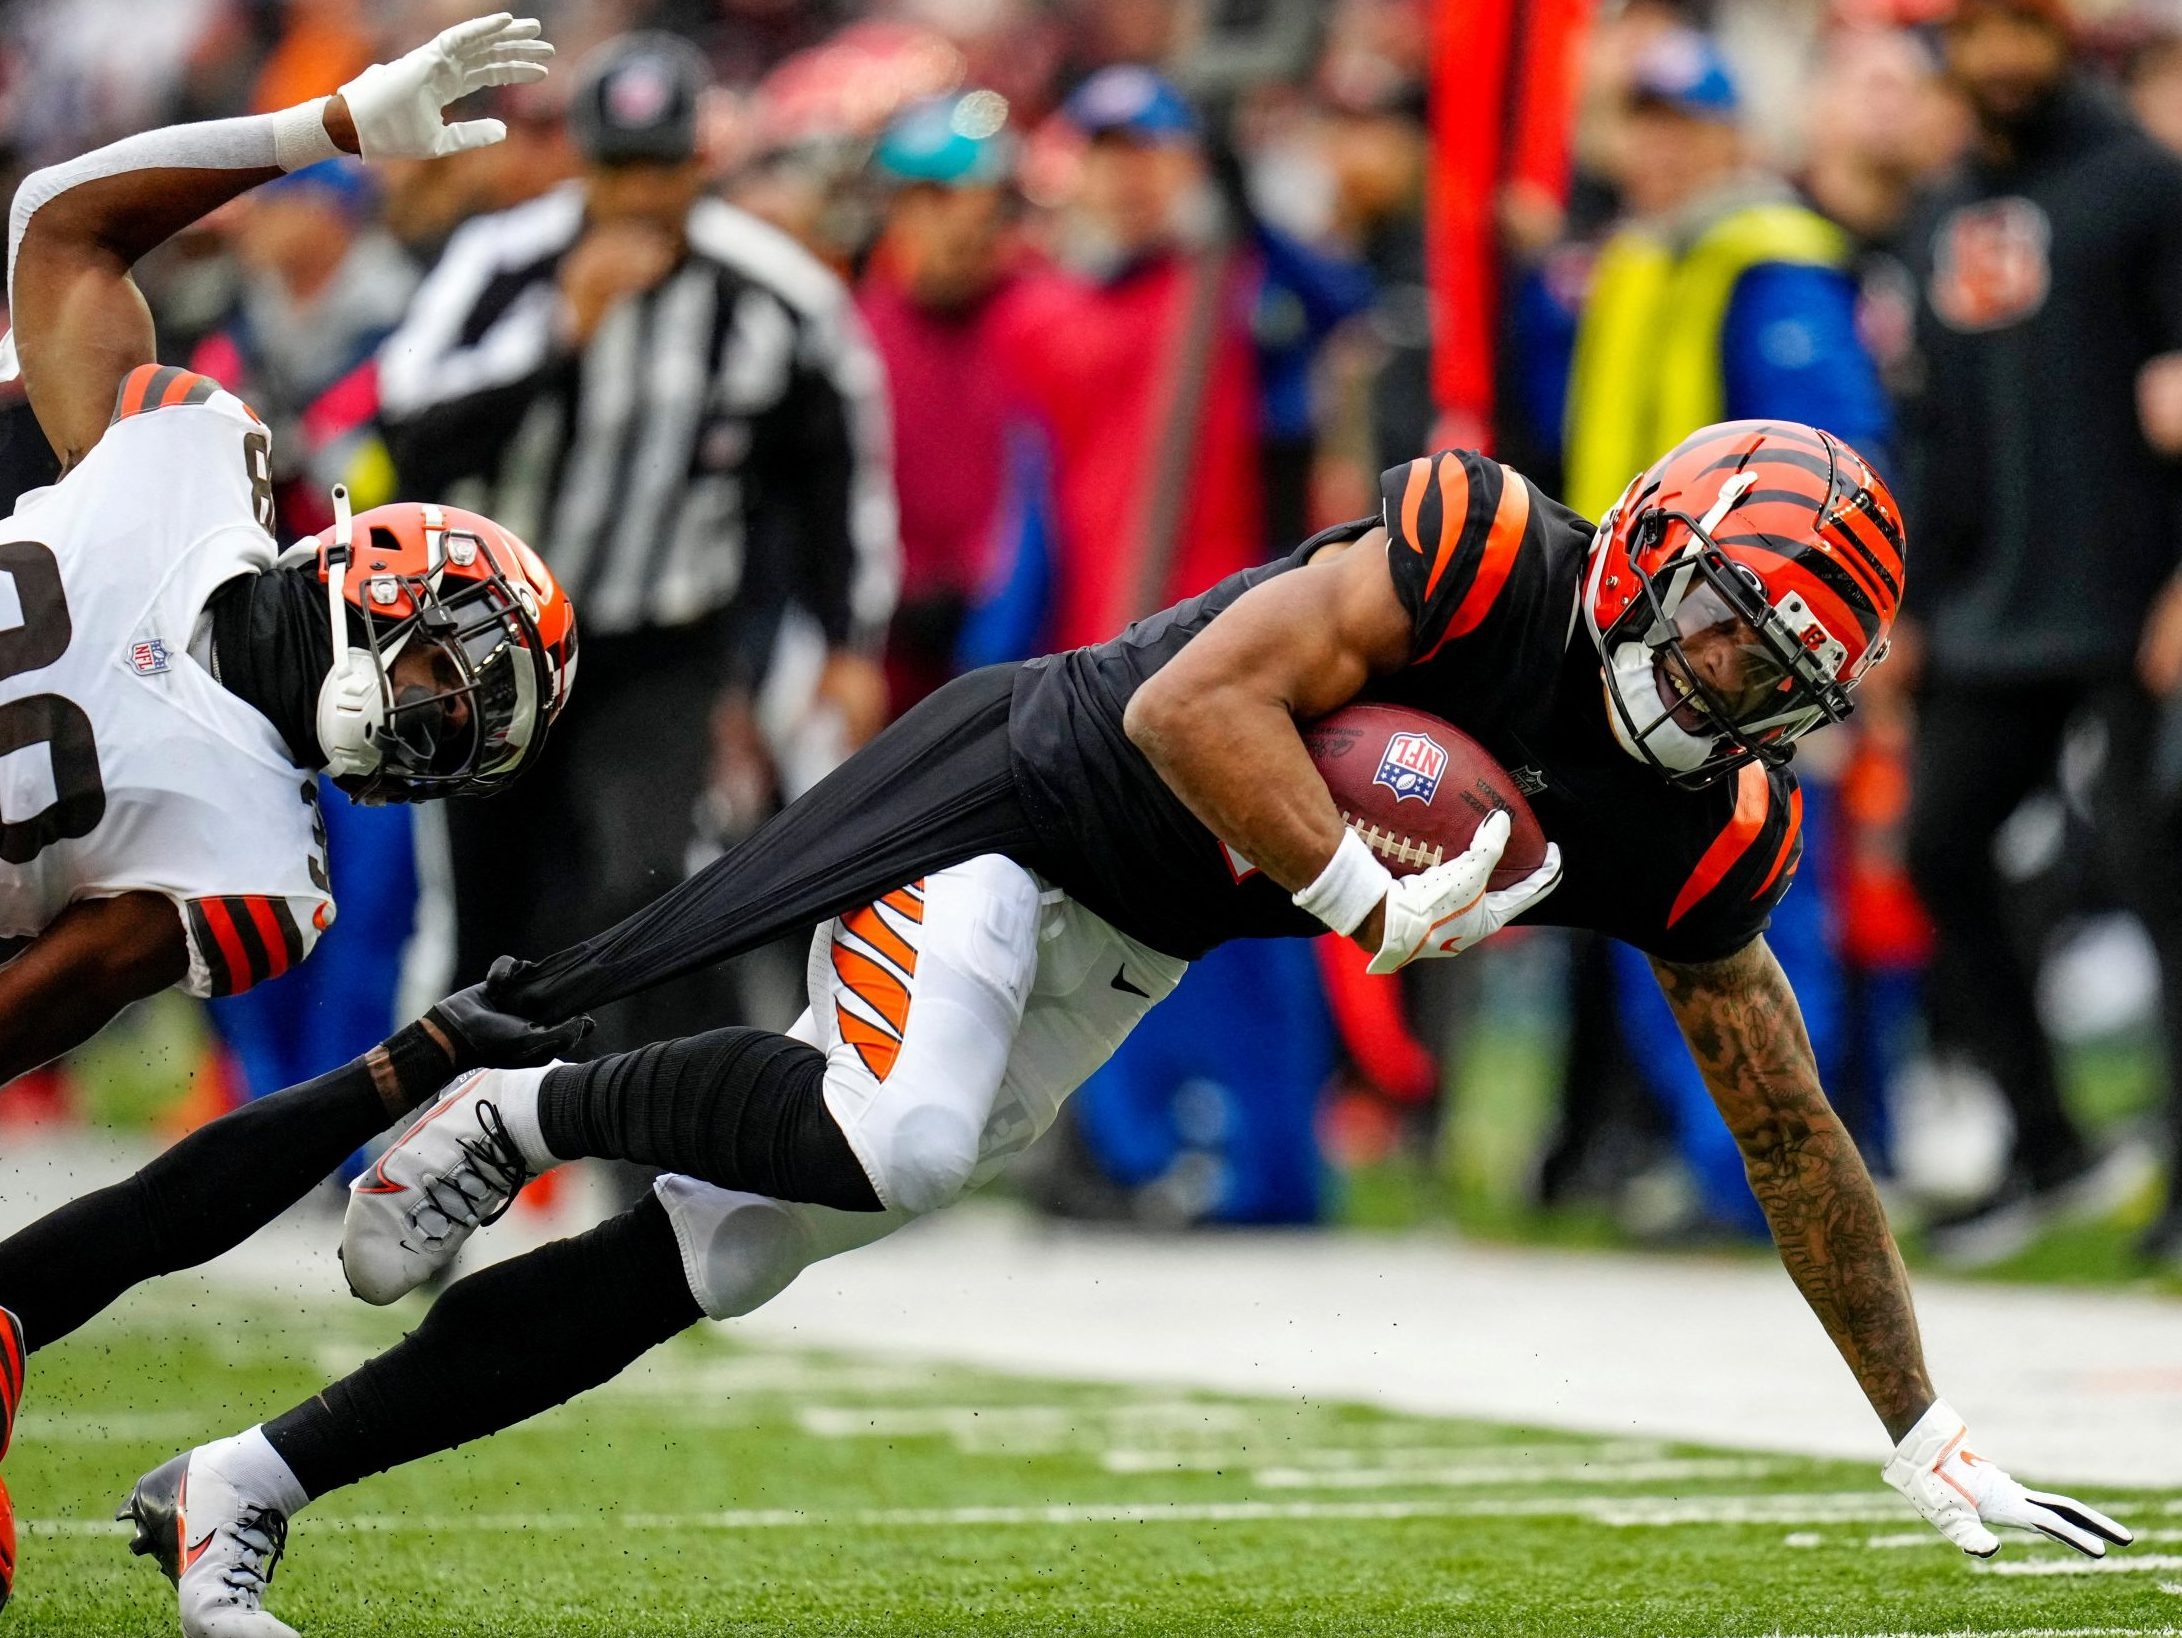 NFL playoffs: Bengals look to unseat Chiefs as top dog in AFC